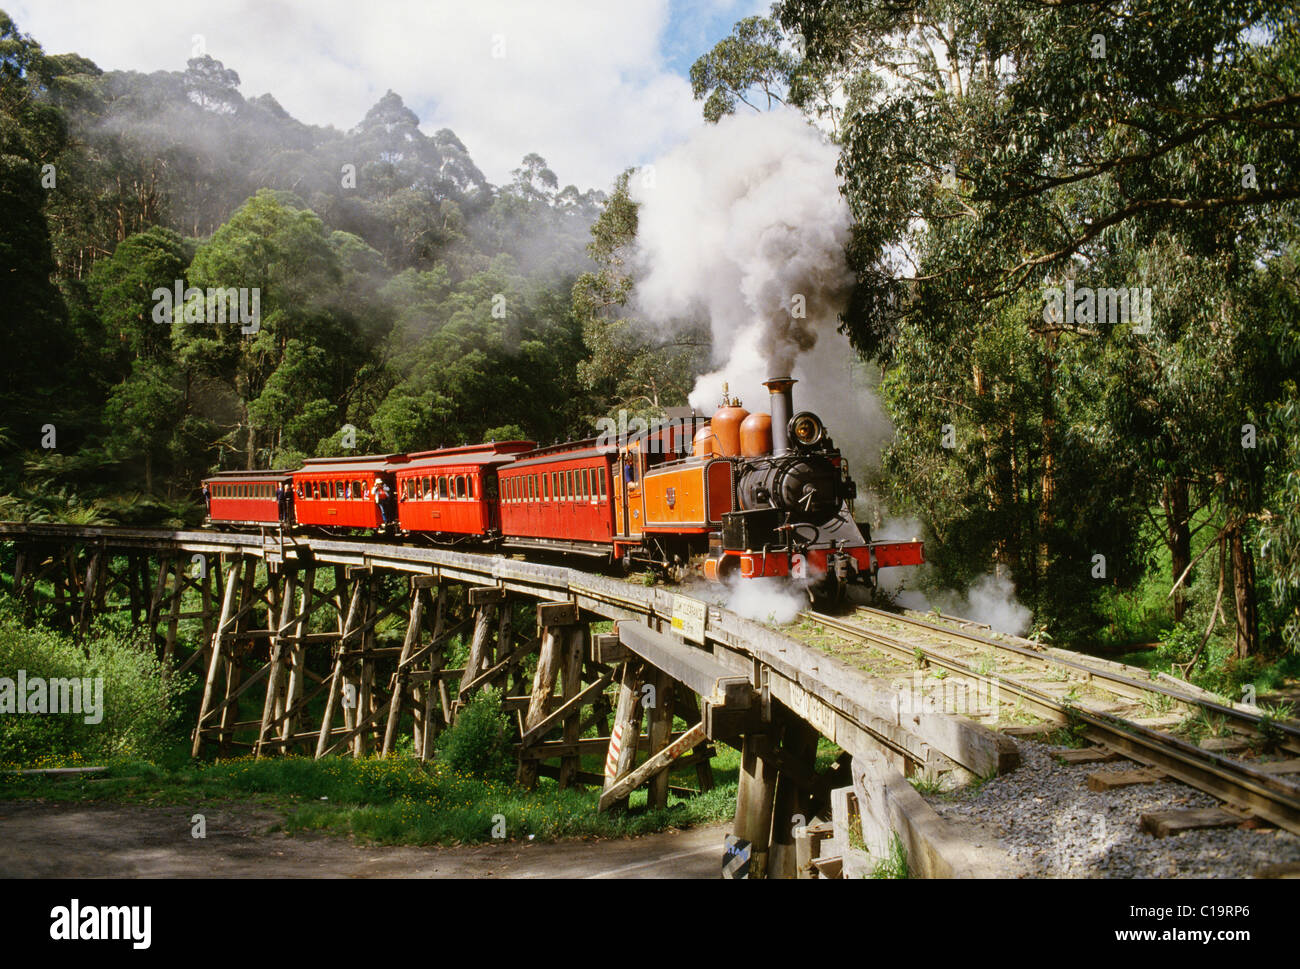 Puffing Billy Train, Australie Banque D'Images